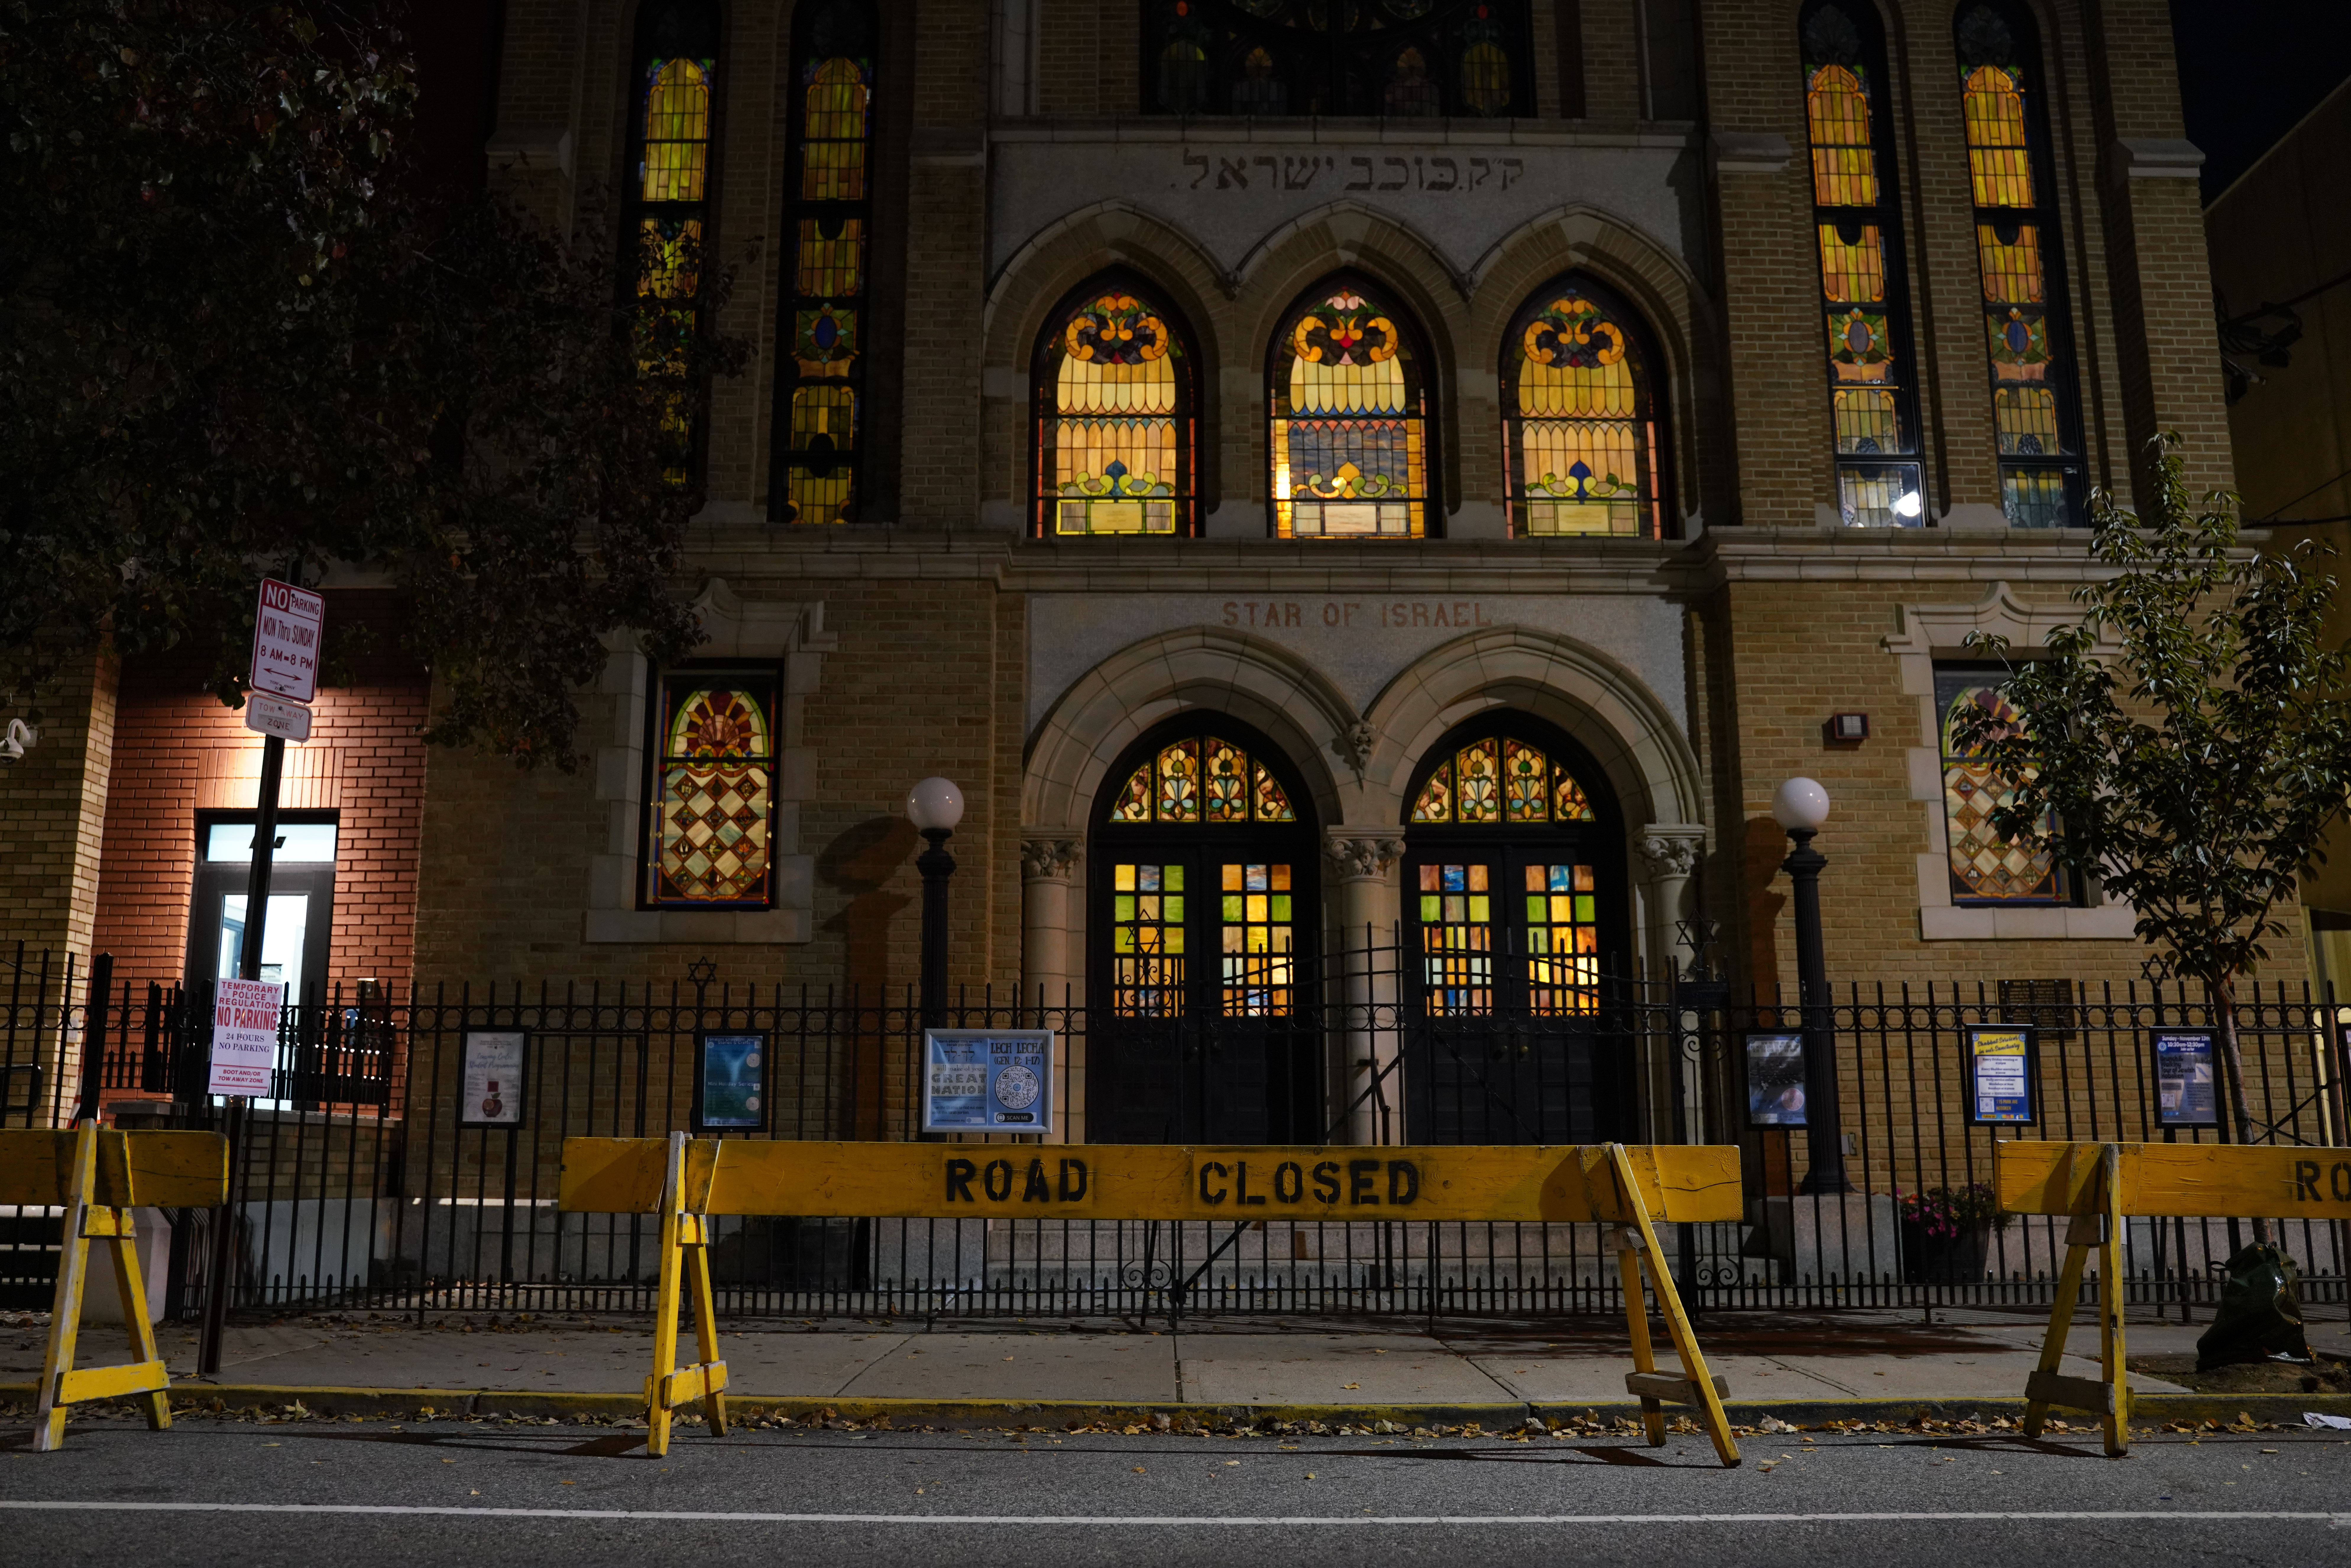 'A spiritual call to arms’ – as NJ synagogues face another
threat, worship becomes an act of defiance